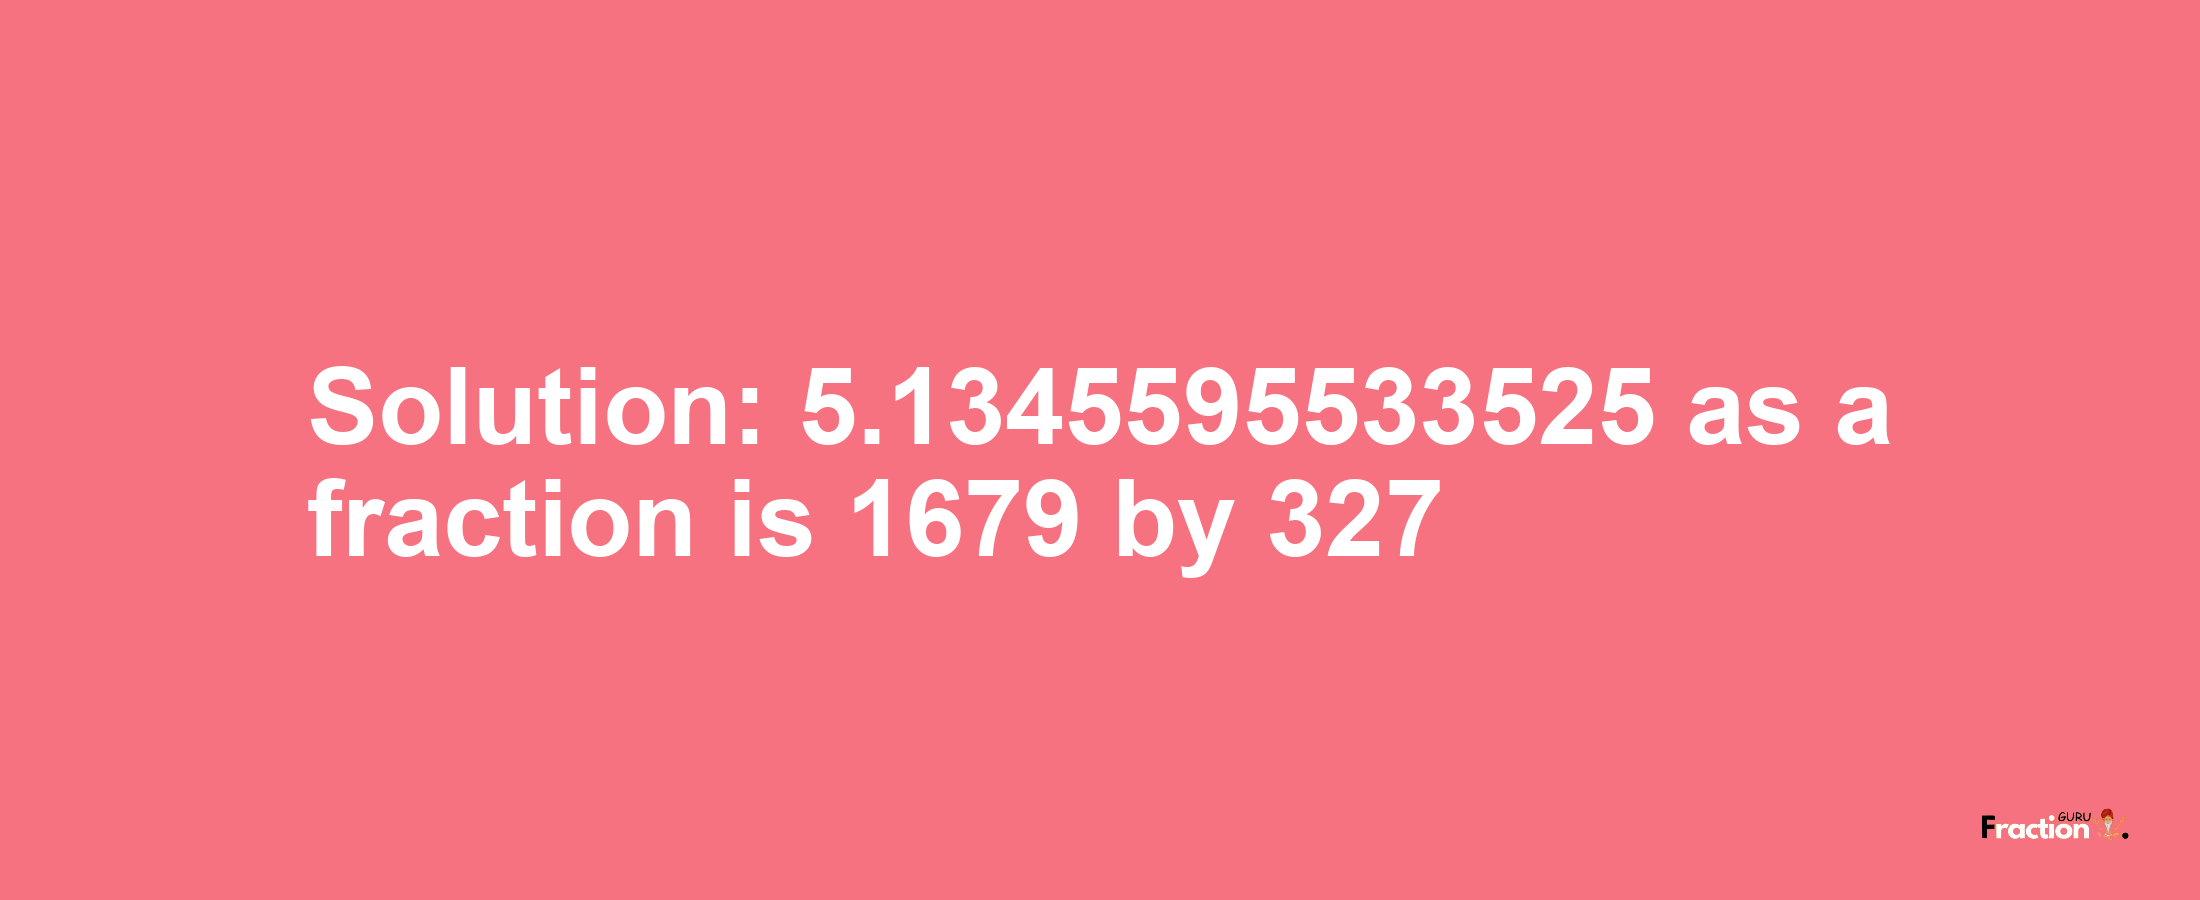 Solution:5.1345595533525 as a fraction is 1679/327